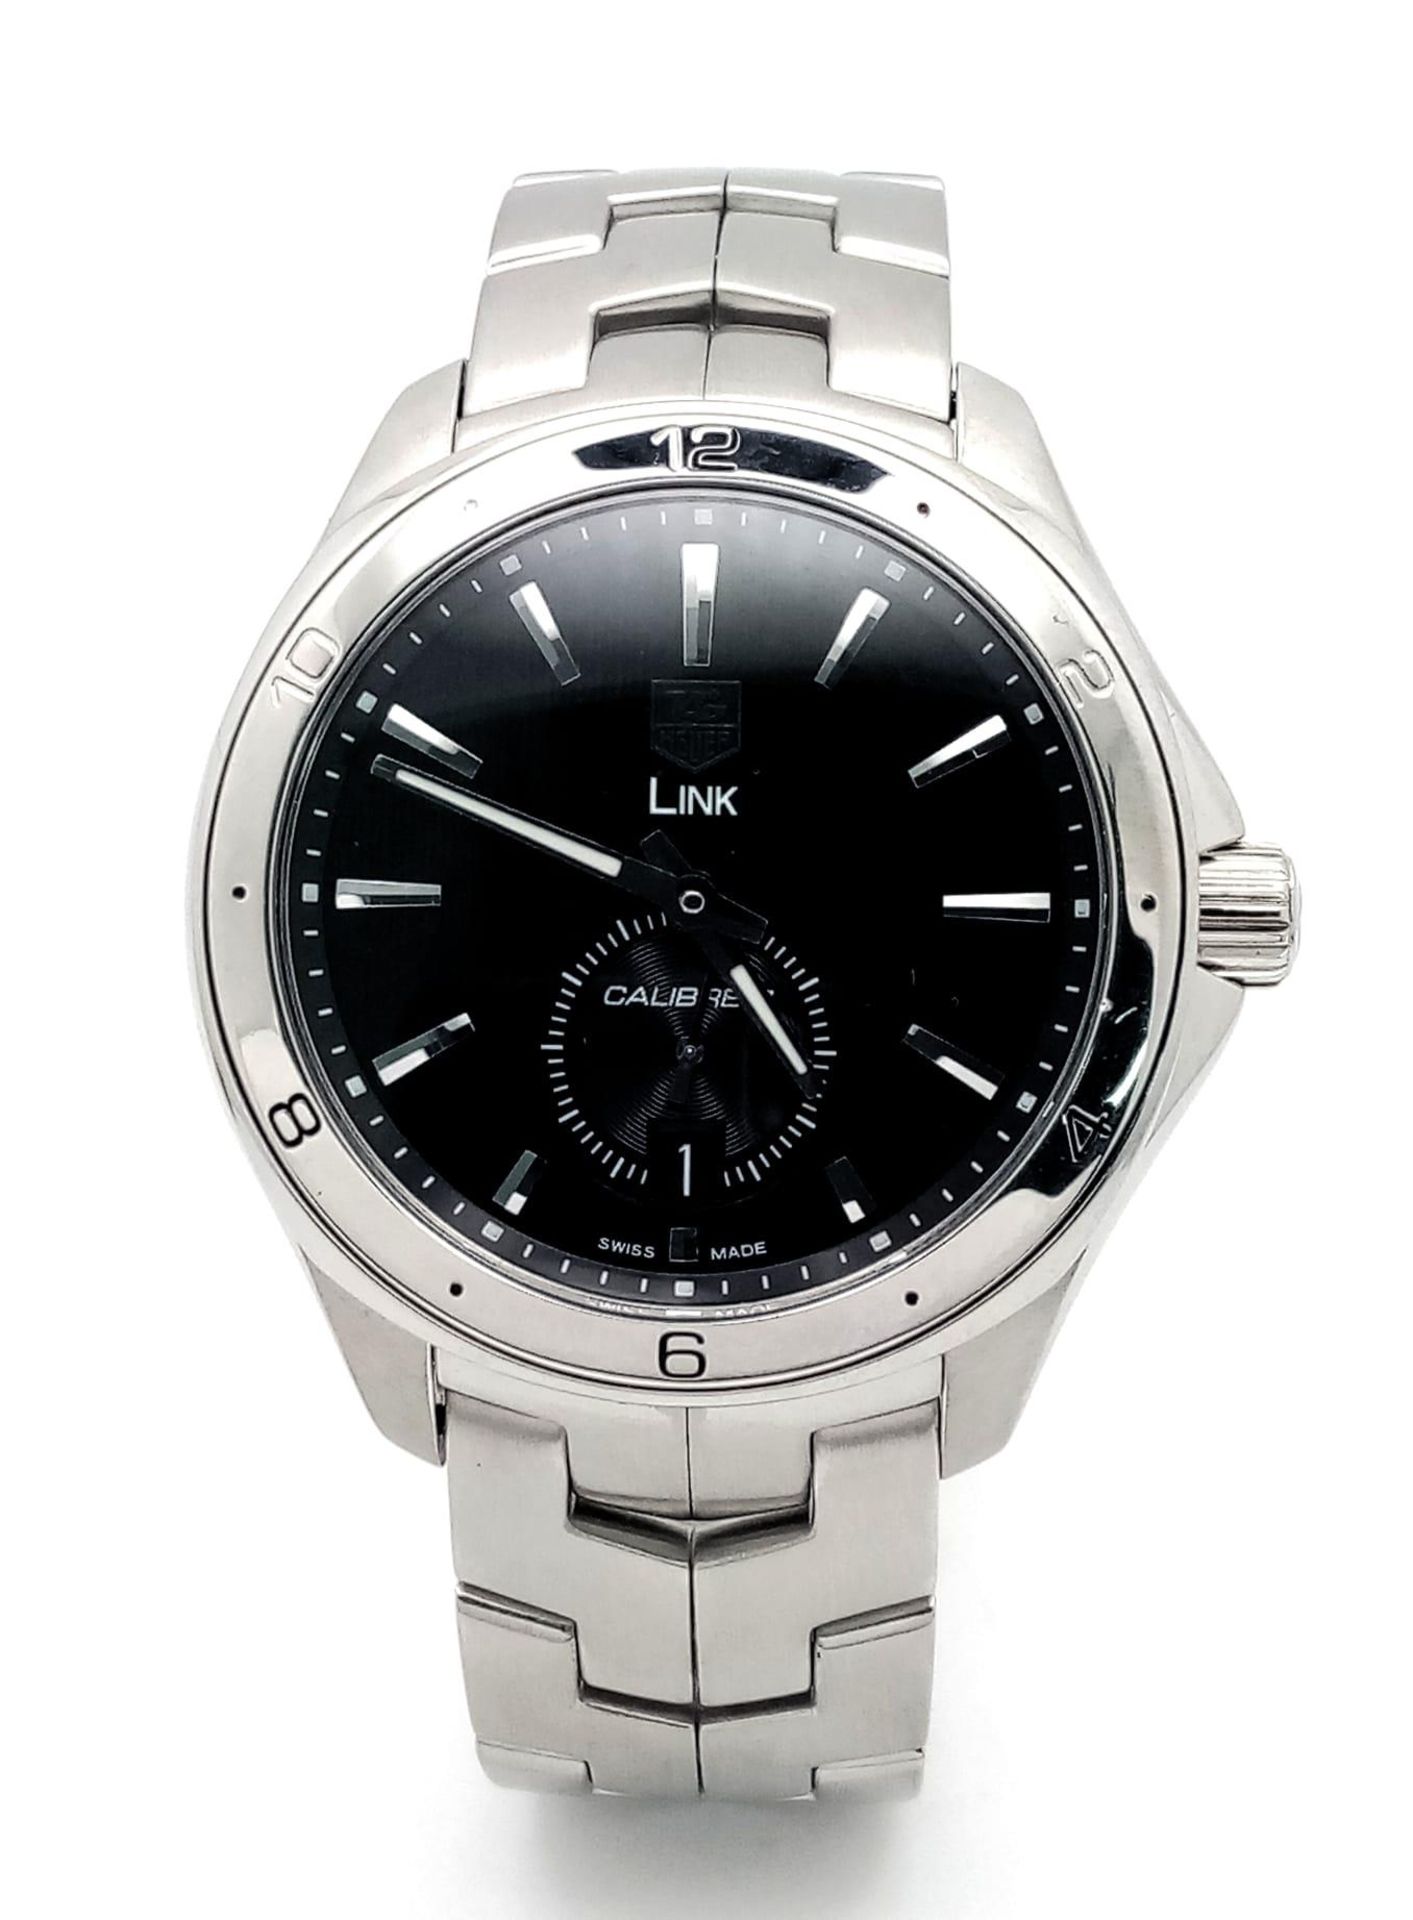 A Tag Heuer Link Calibre 6 Automatic Watch. Stainless steel bracelet and case - 41mm. Black dial - Image 3 of 9